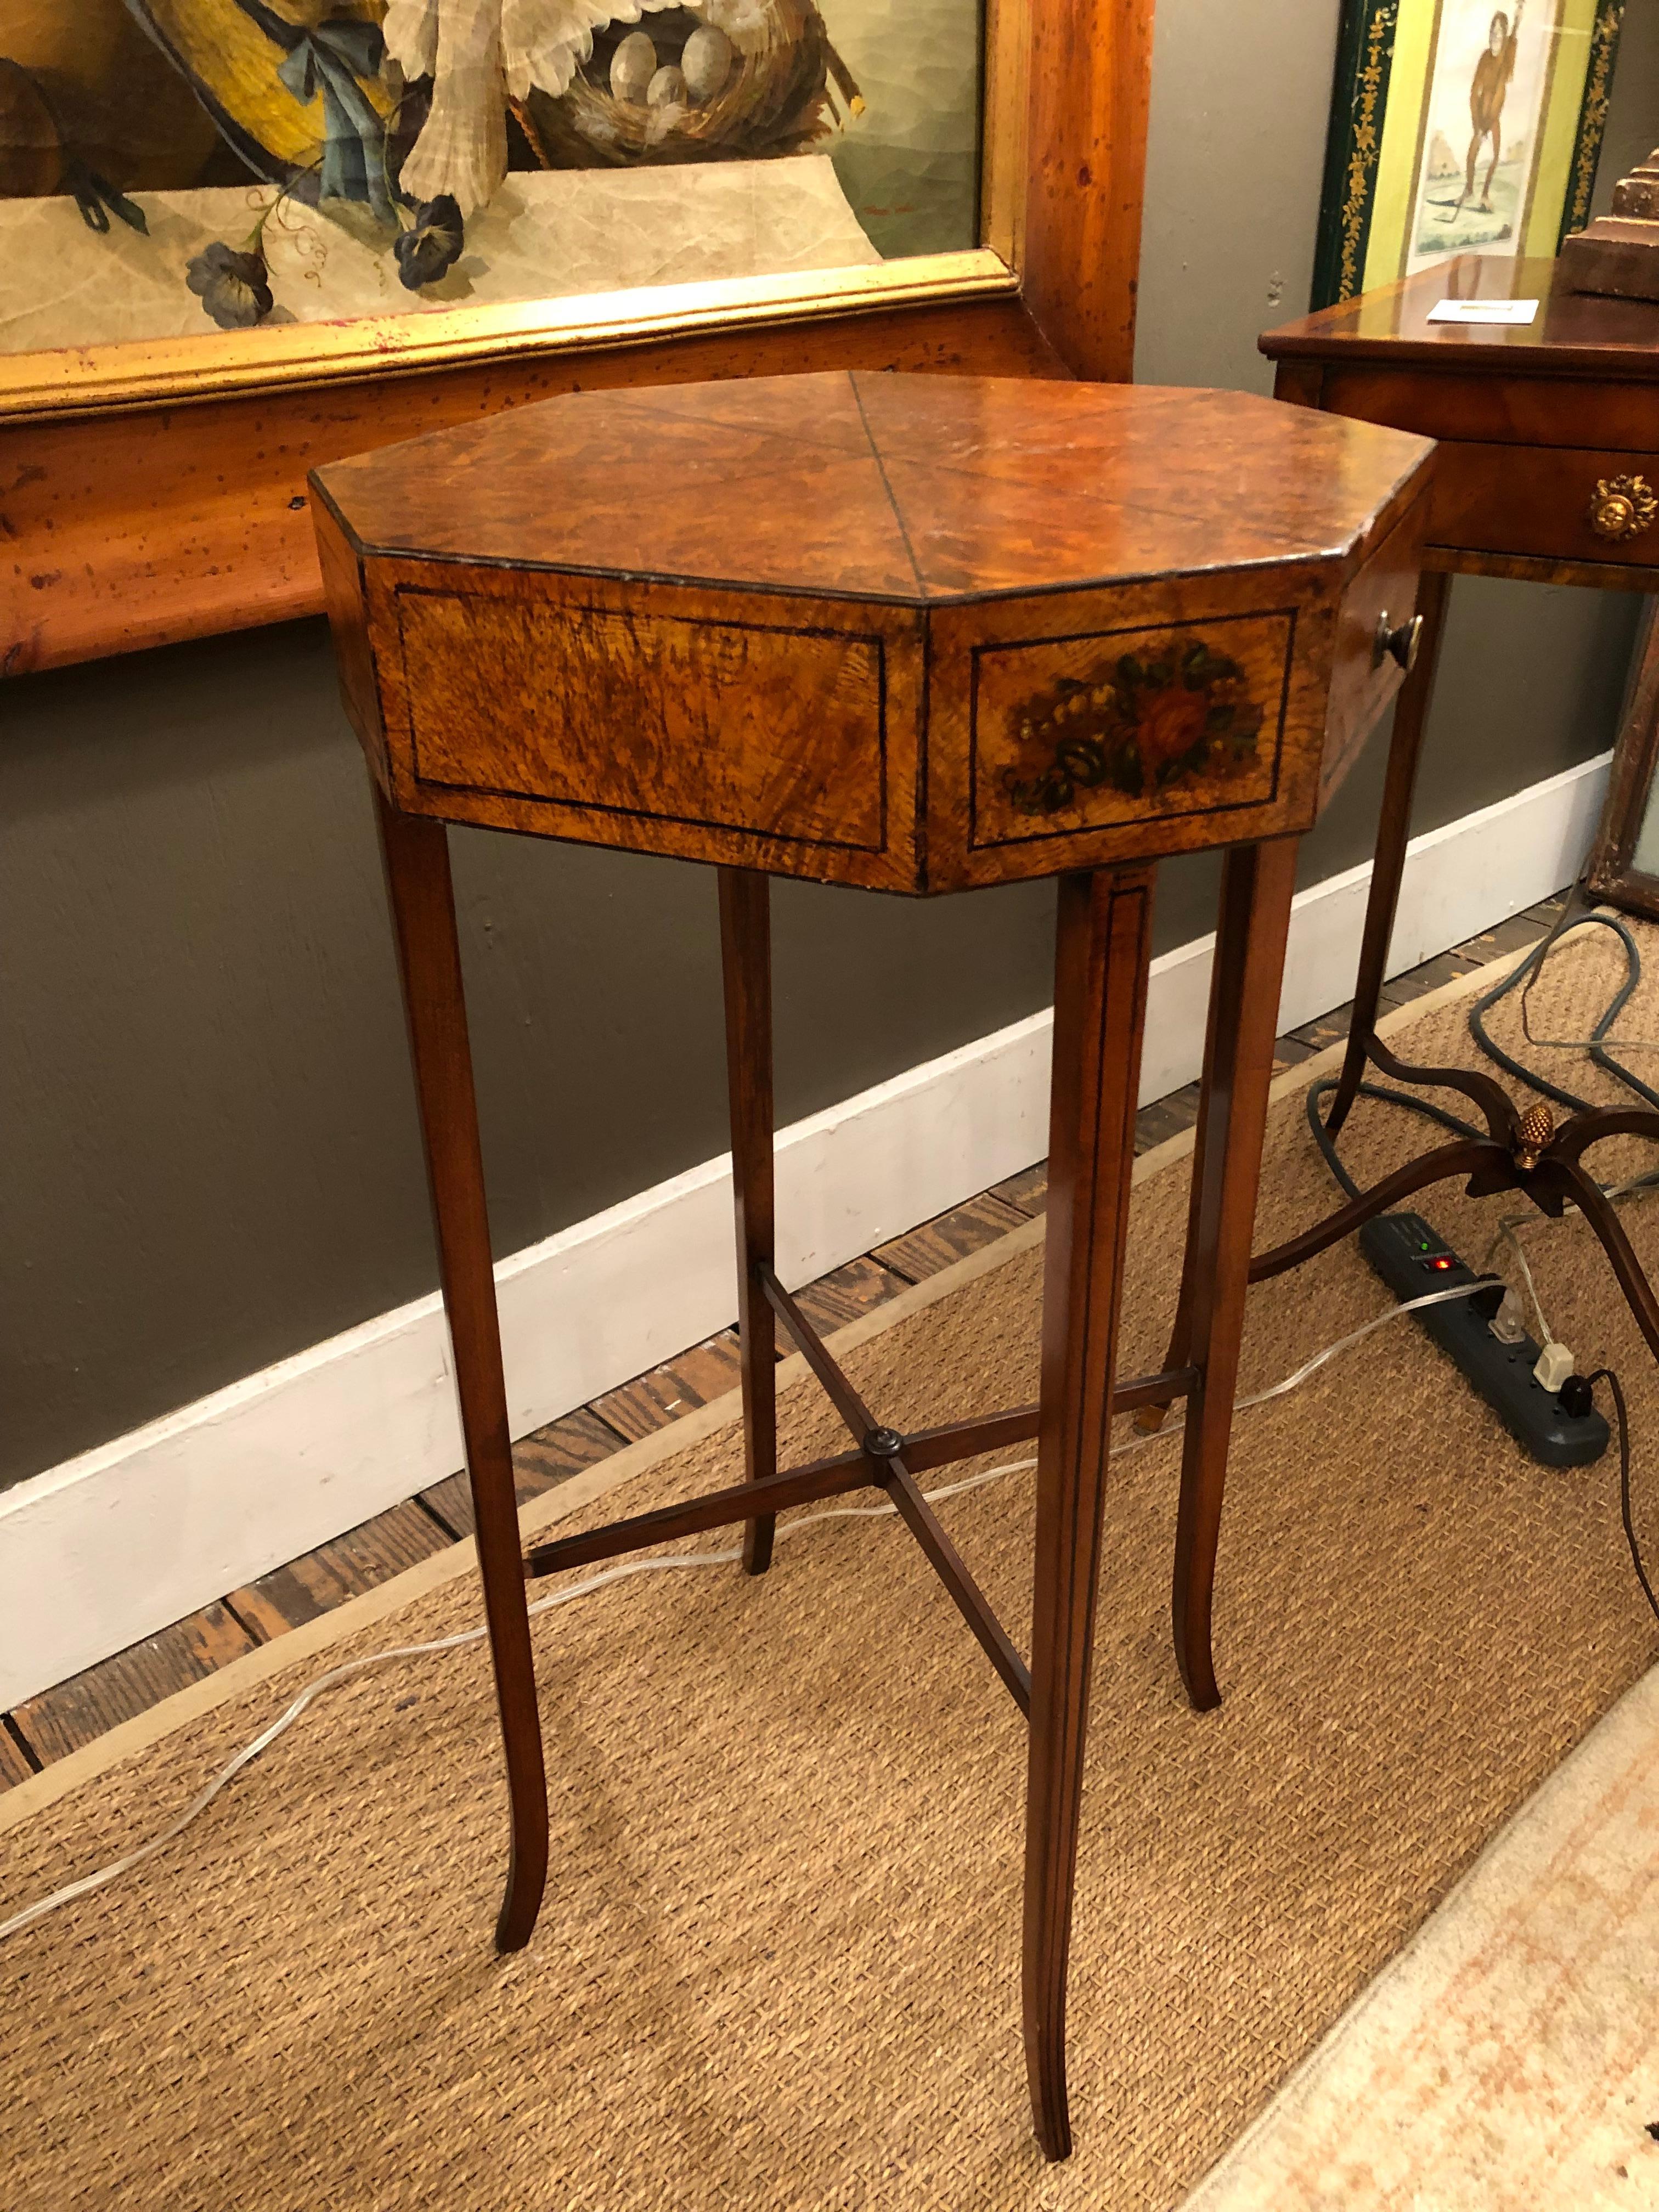 Lovely delicate side or end table having octagonal shaped top, single drawer, thin elegant legs and stretcher, and paint decorated to look like burl wood with beautiful floral decoration on side.